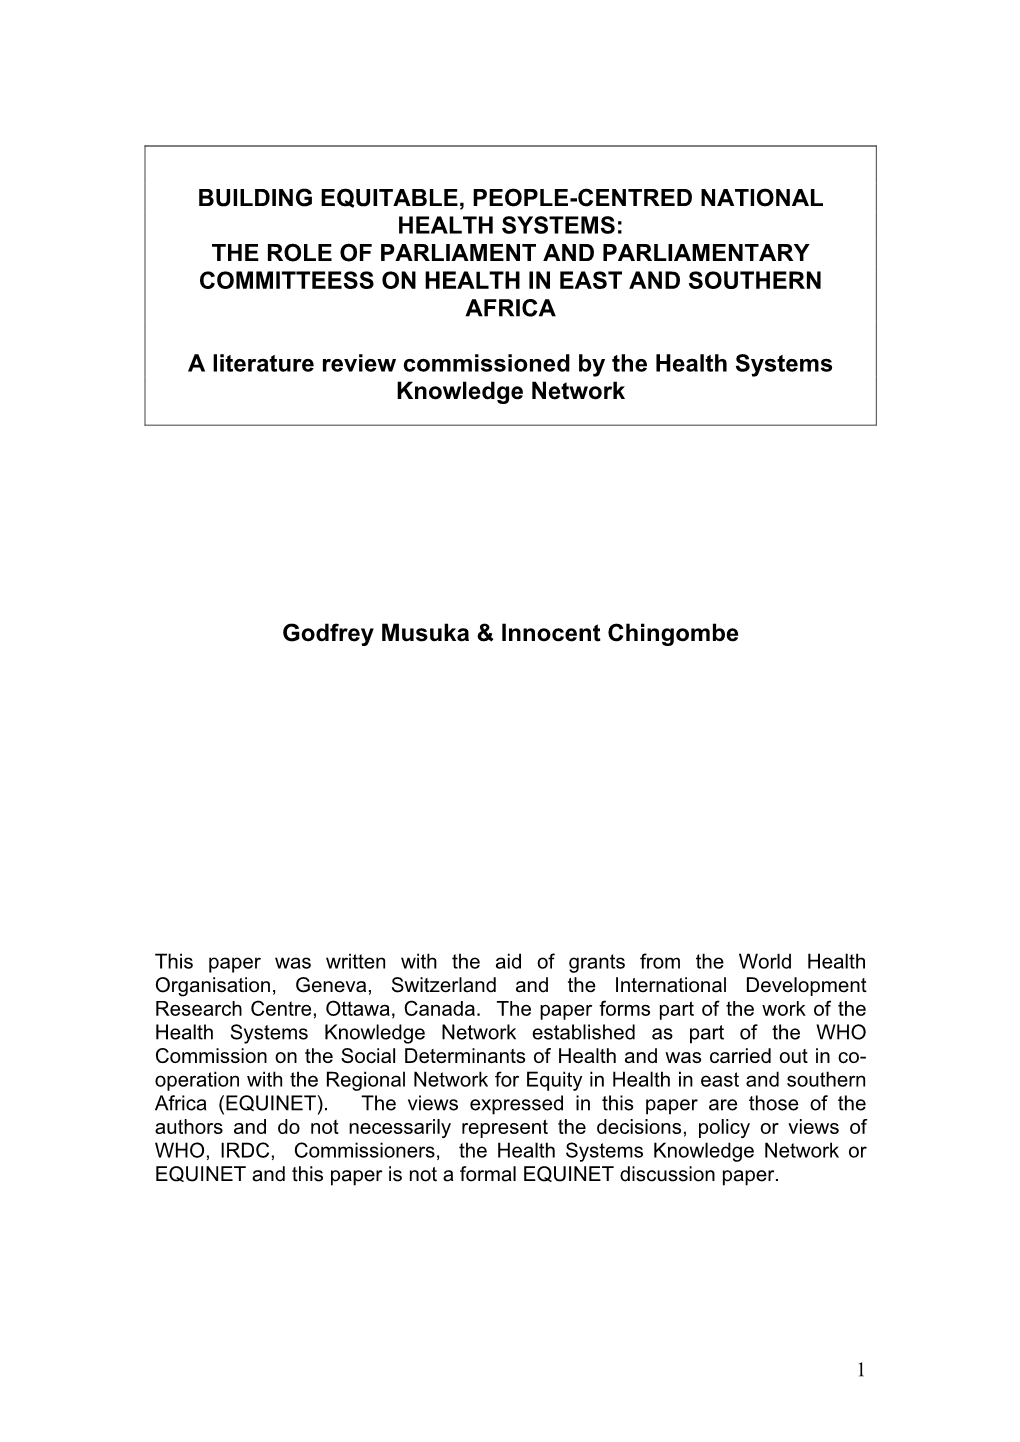 The Role of Parliament and Parliamentary Committeess on Health in East and Southern Africa